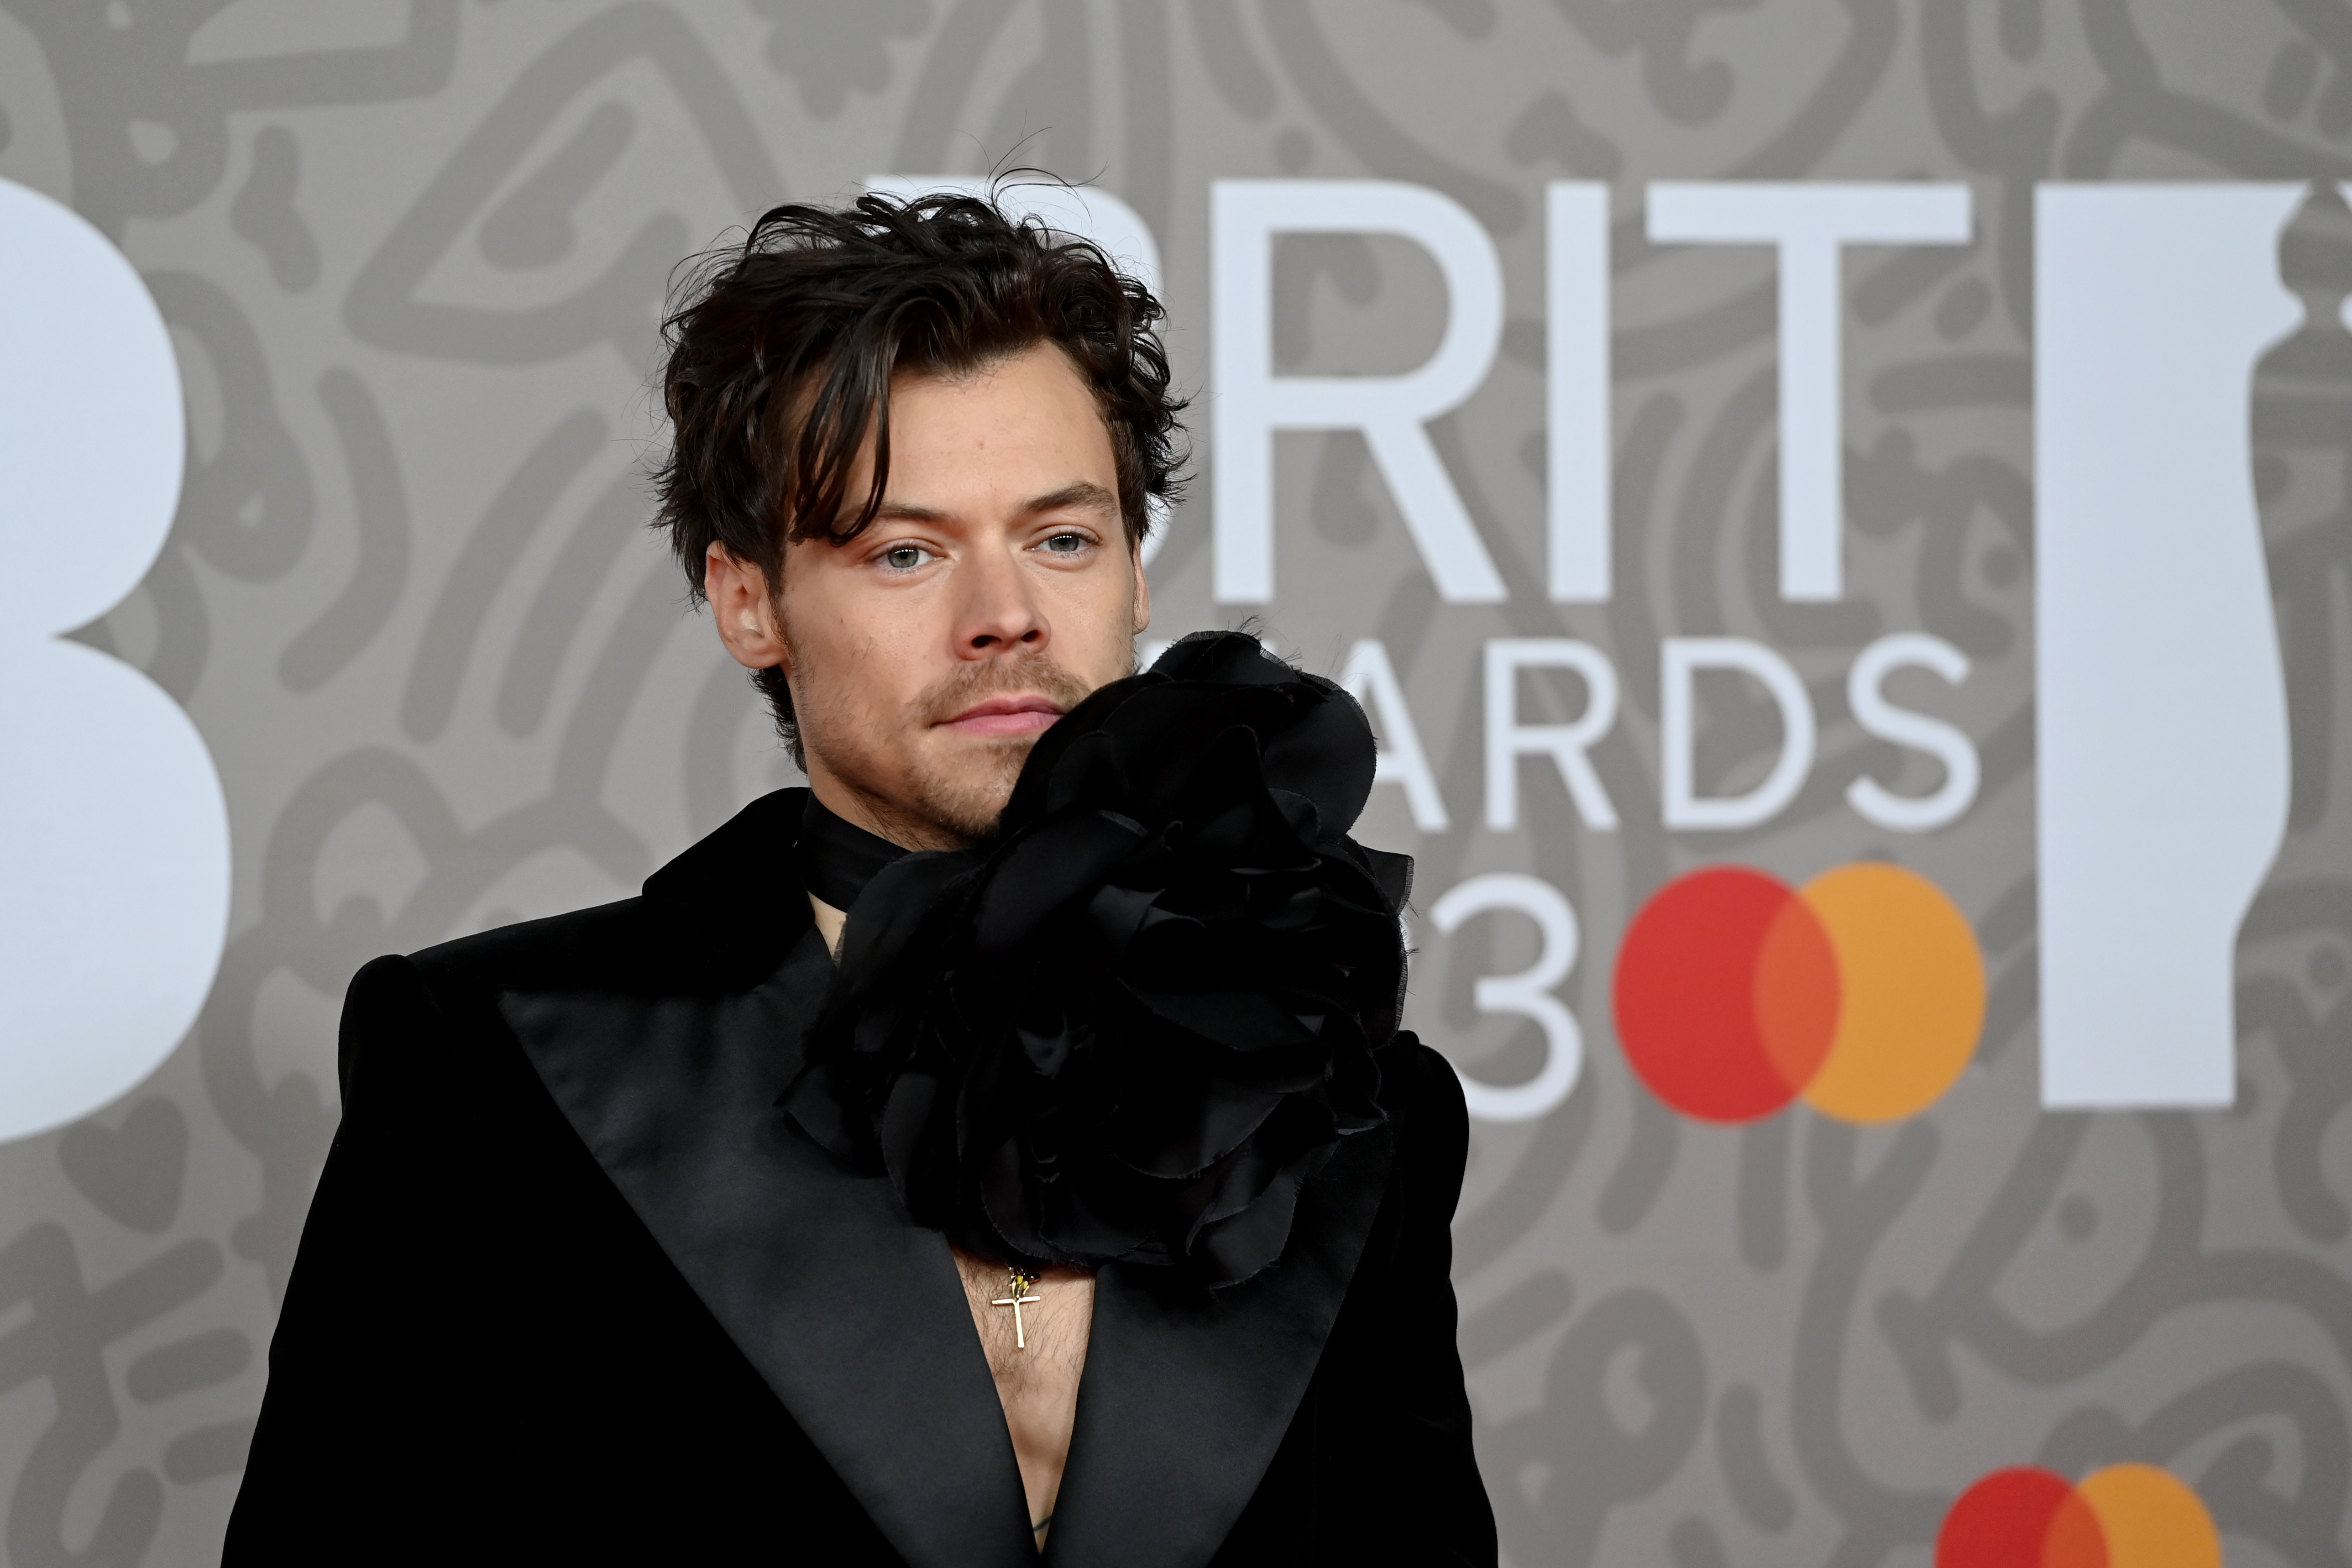 Harry Styles attends The BRIT Awards 2023 at The O2 Arena on February 11, 2023 in London, England. | Source: Getty Images